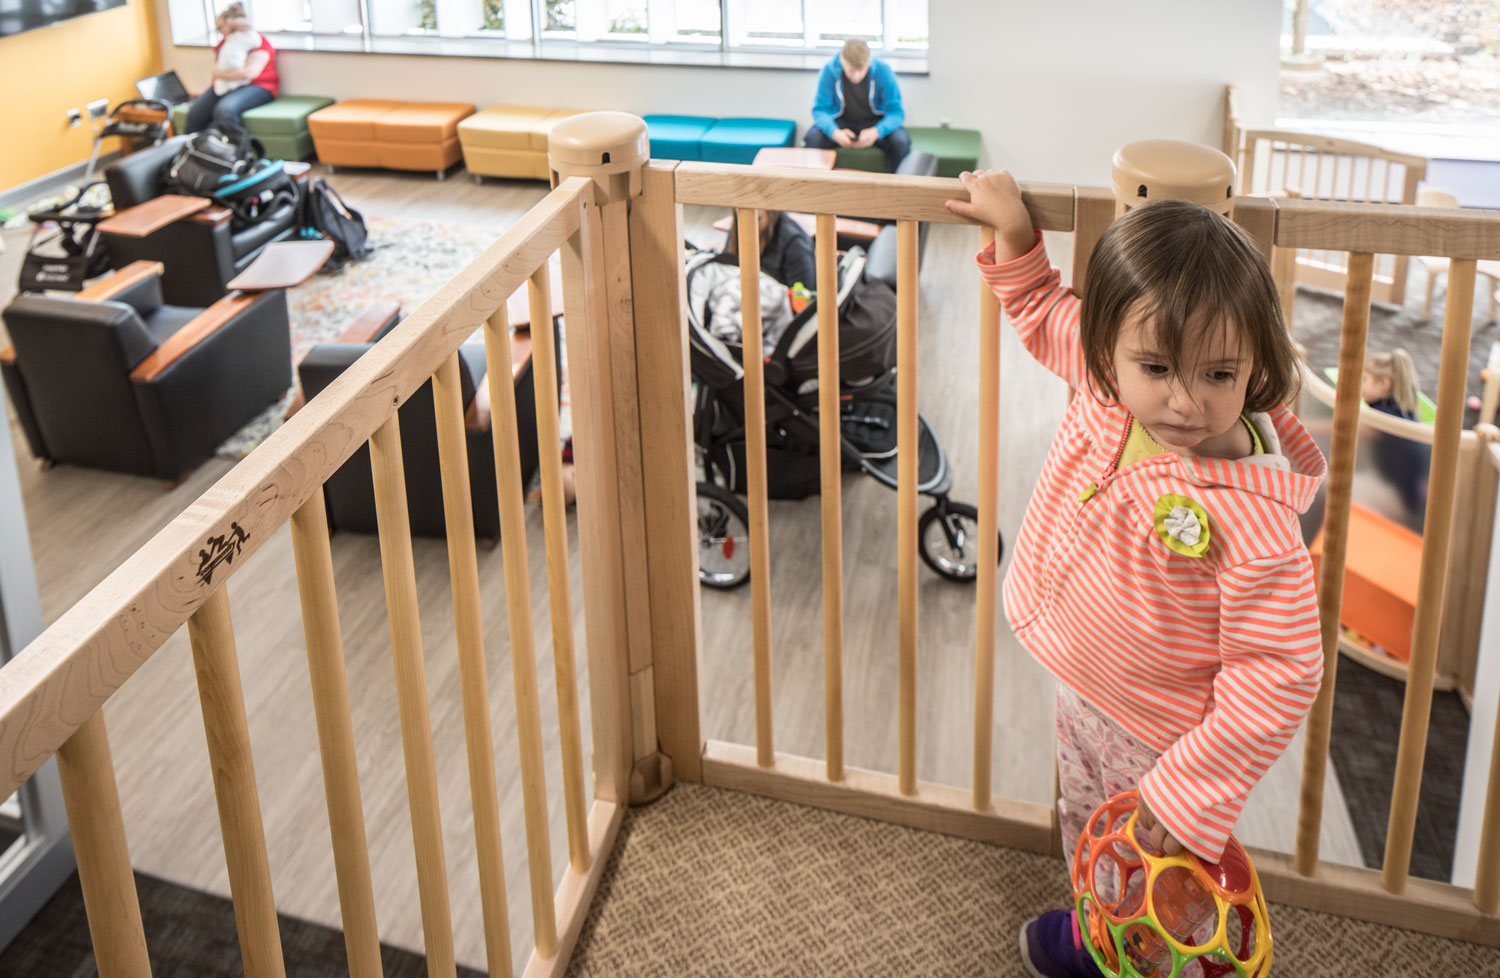 A child stands on top of the play structure in the new family study room